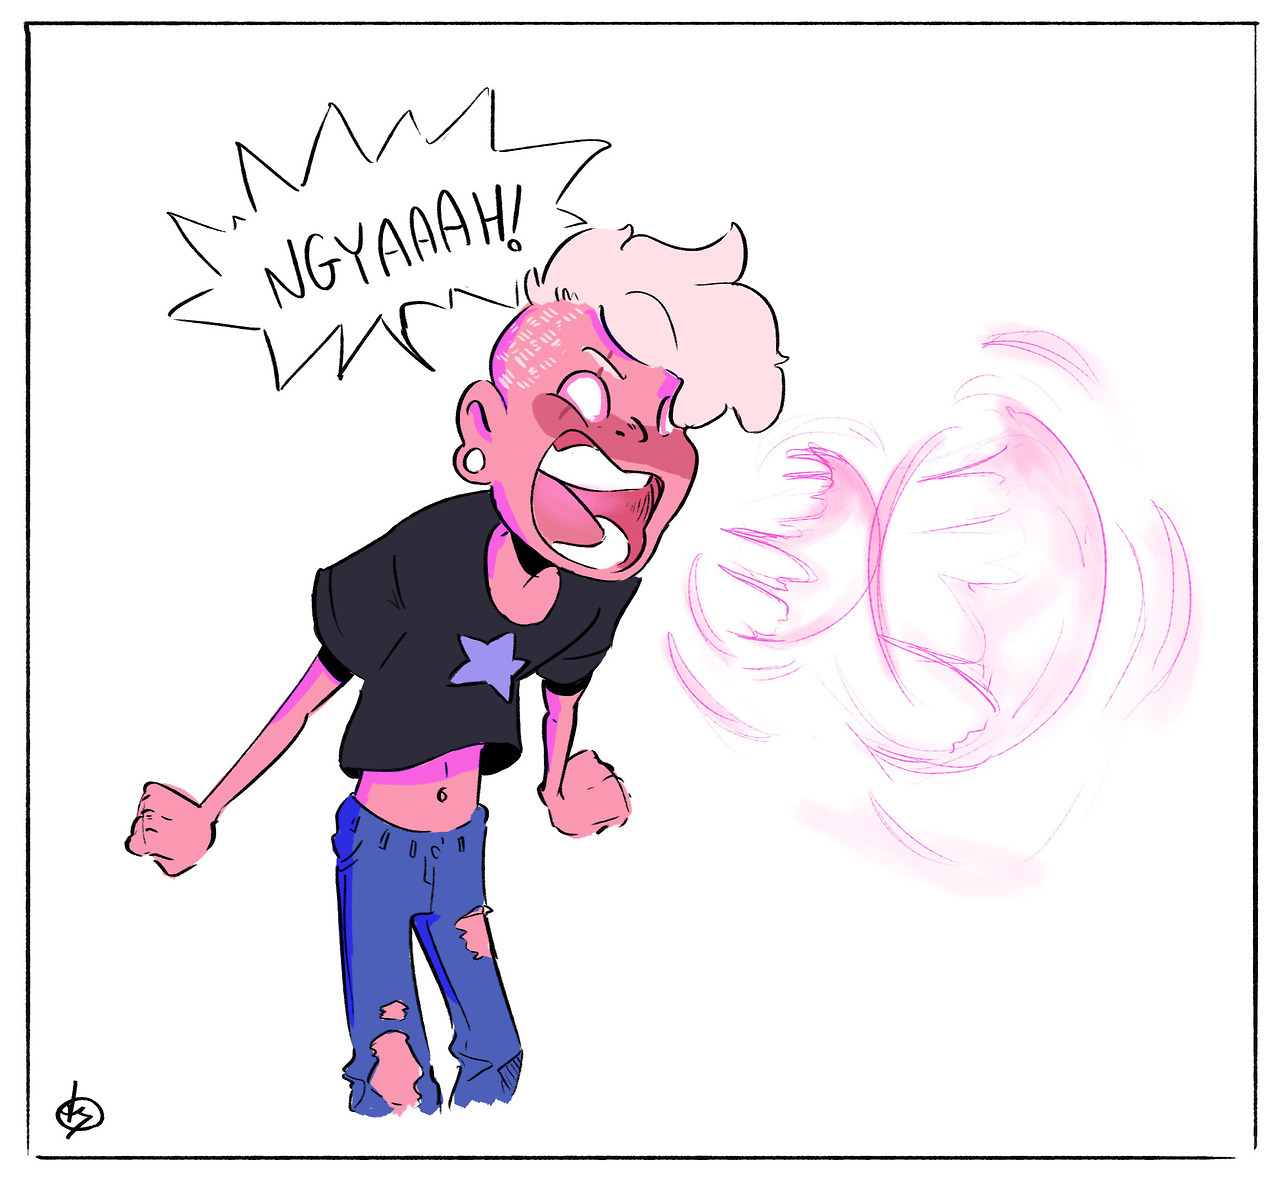 I sincerely hope that Lars got Lion’s ability to create portals by screaming but like in that really high-pitched nasally scream he has